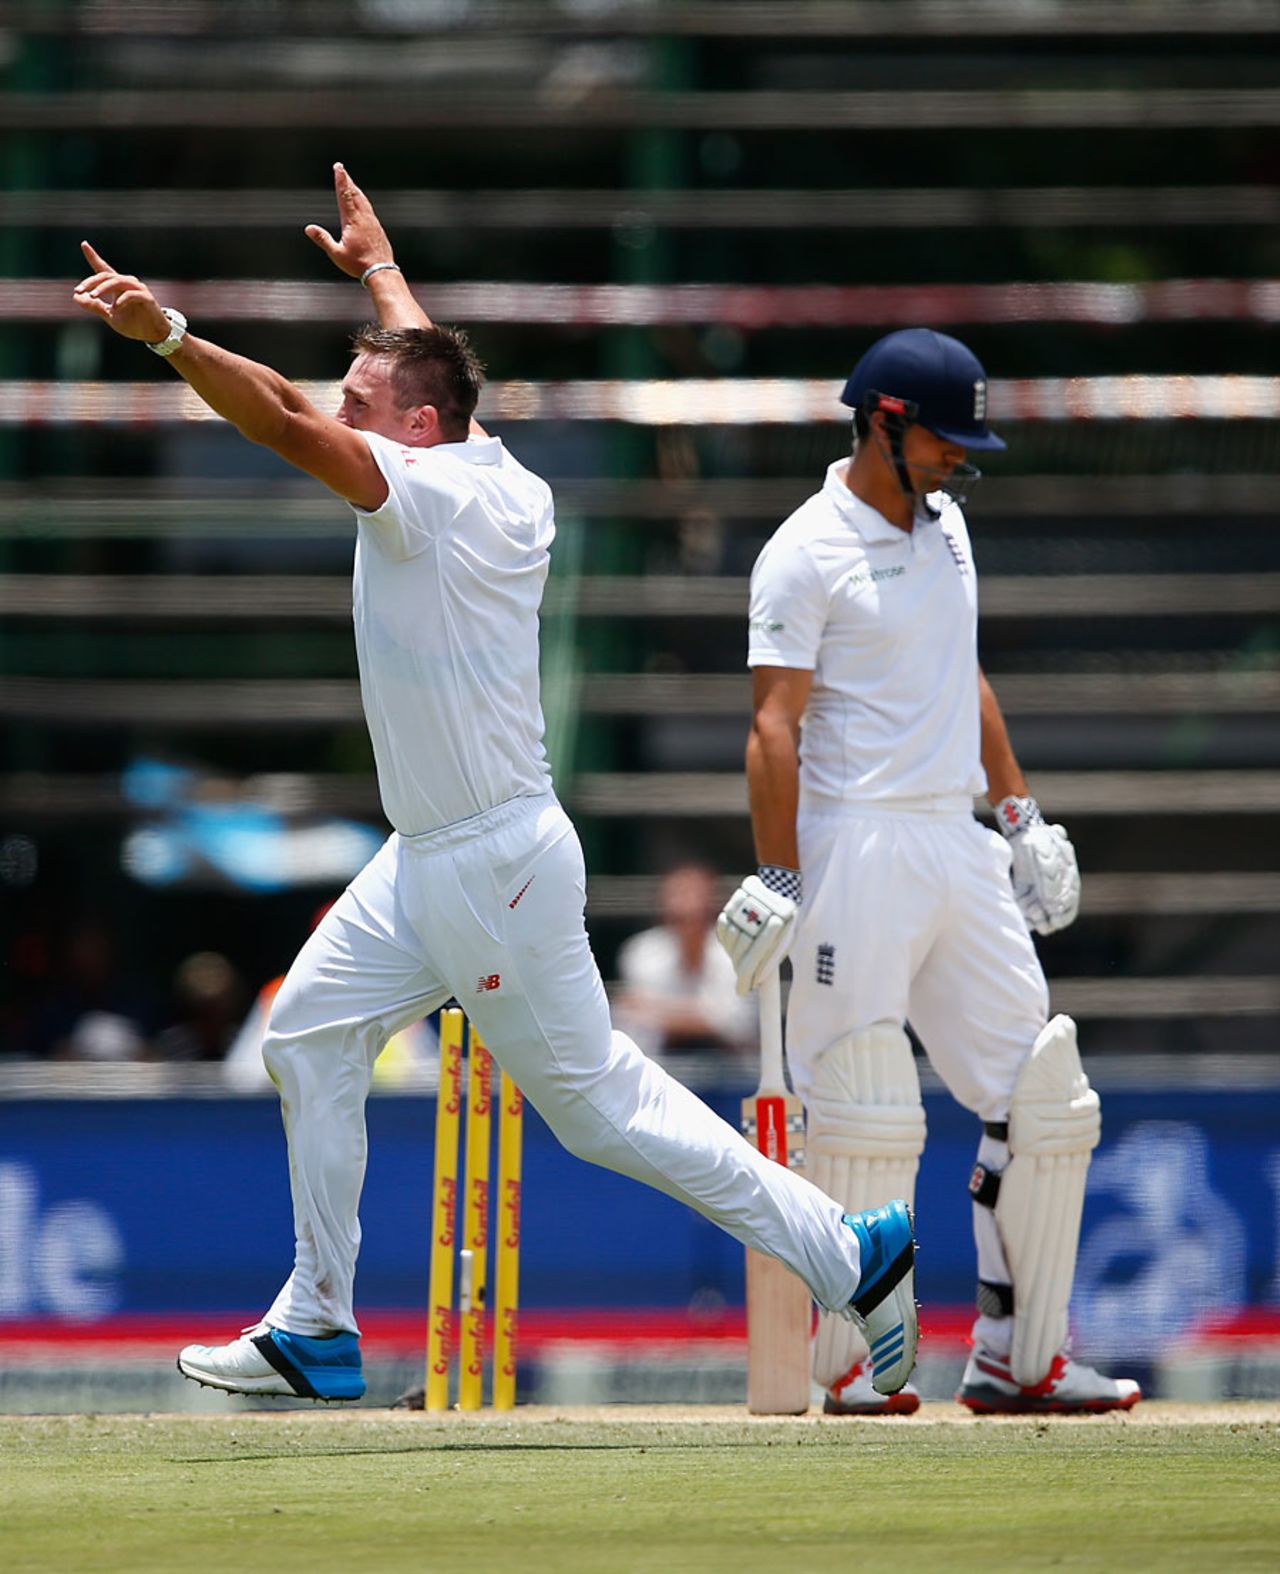 Hardus Viljoen removed Alastair Cook with his first ball in Test cricket, South Africa v England, 3rd Test, Johannesburg, 2nd day, January 15, 2016